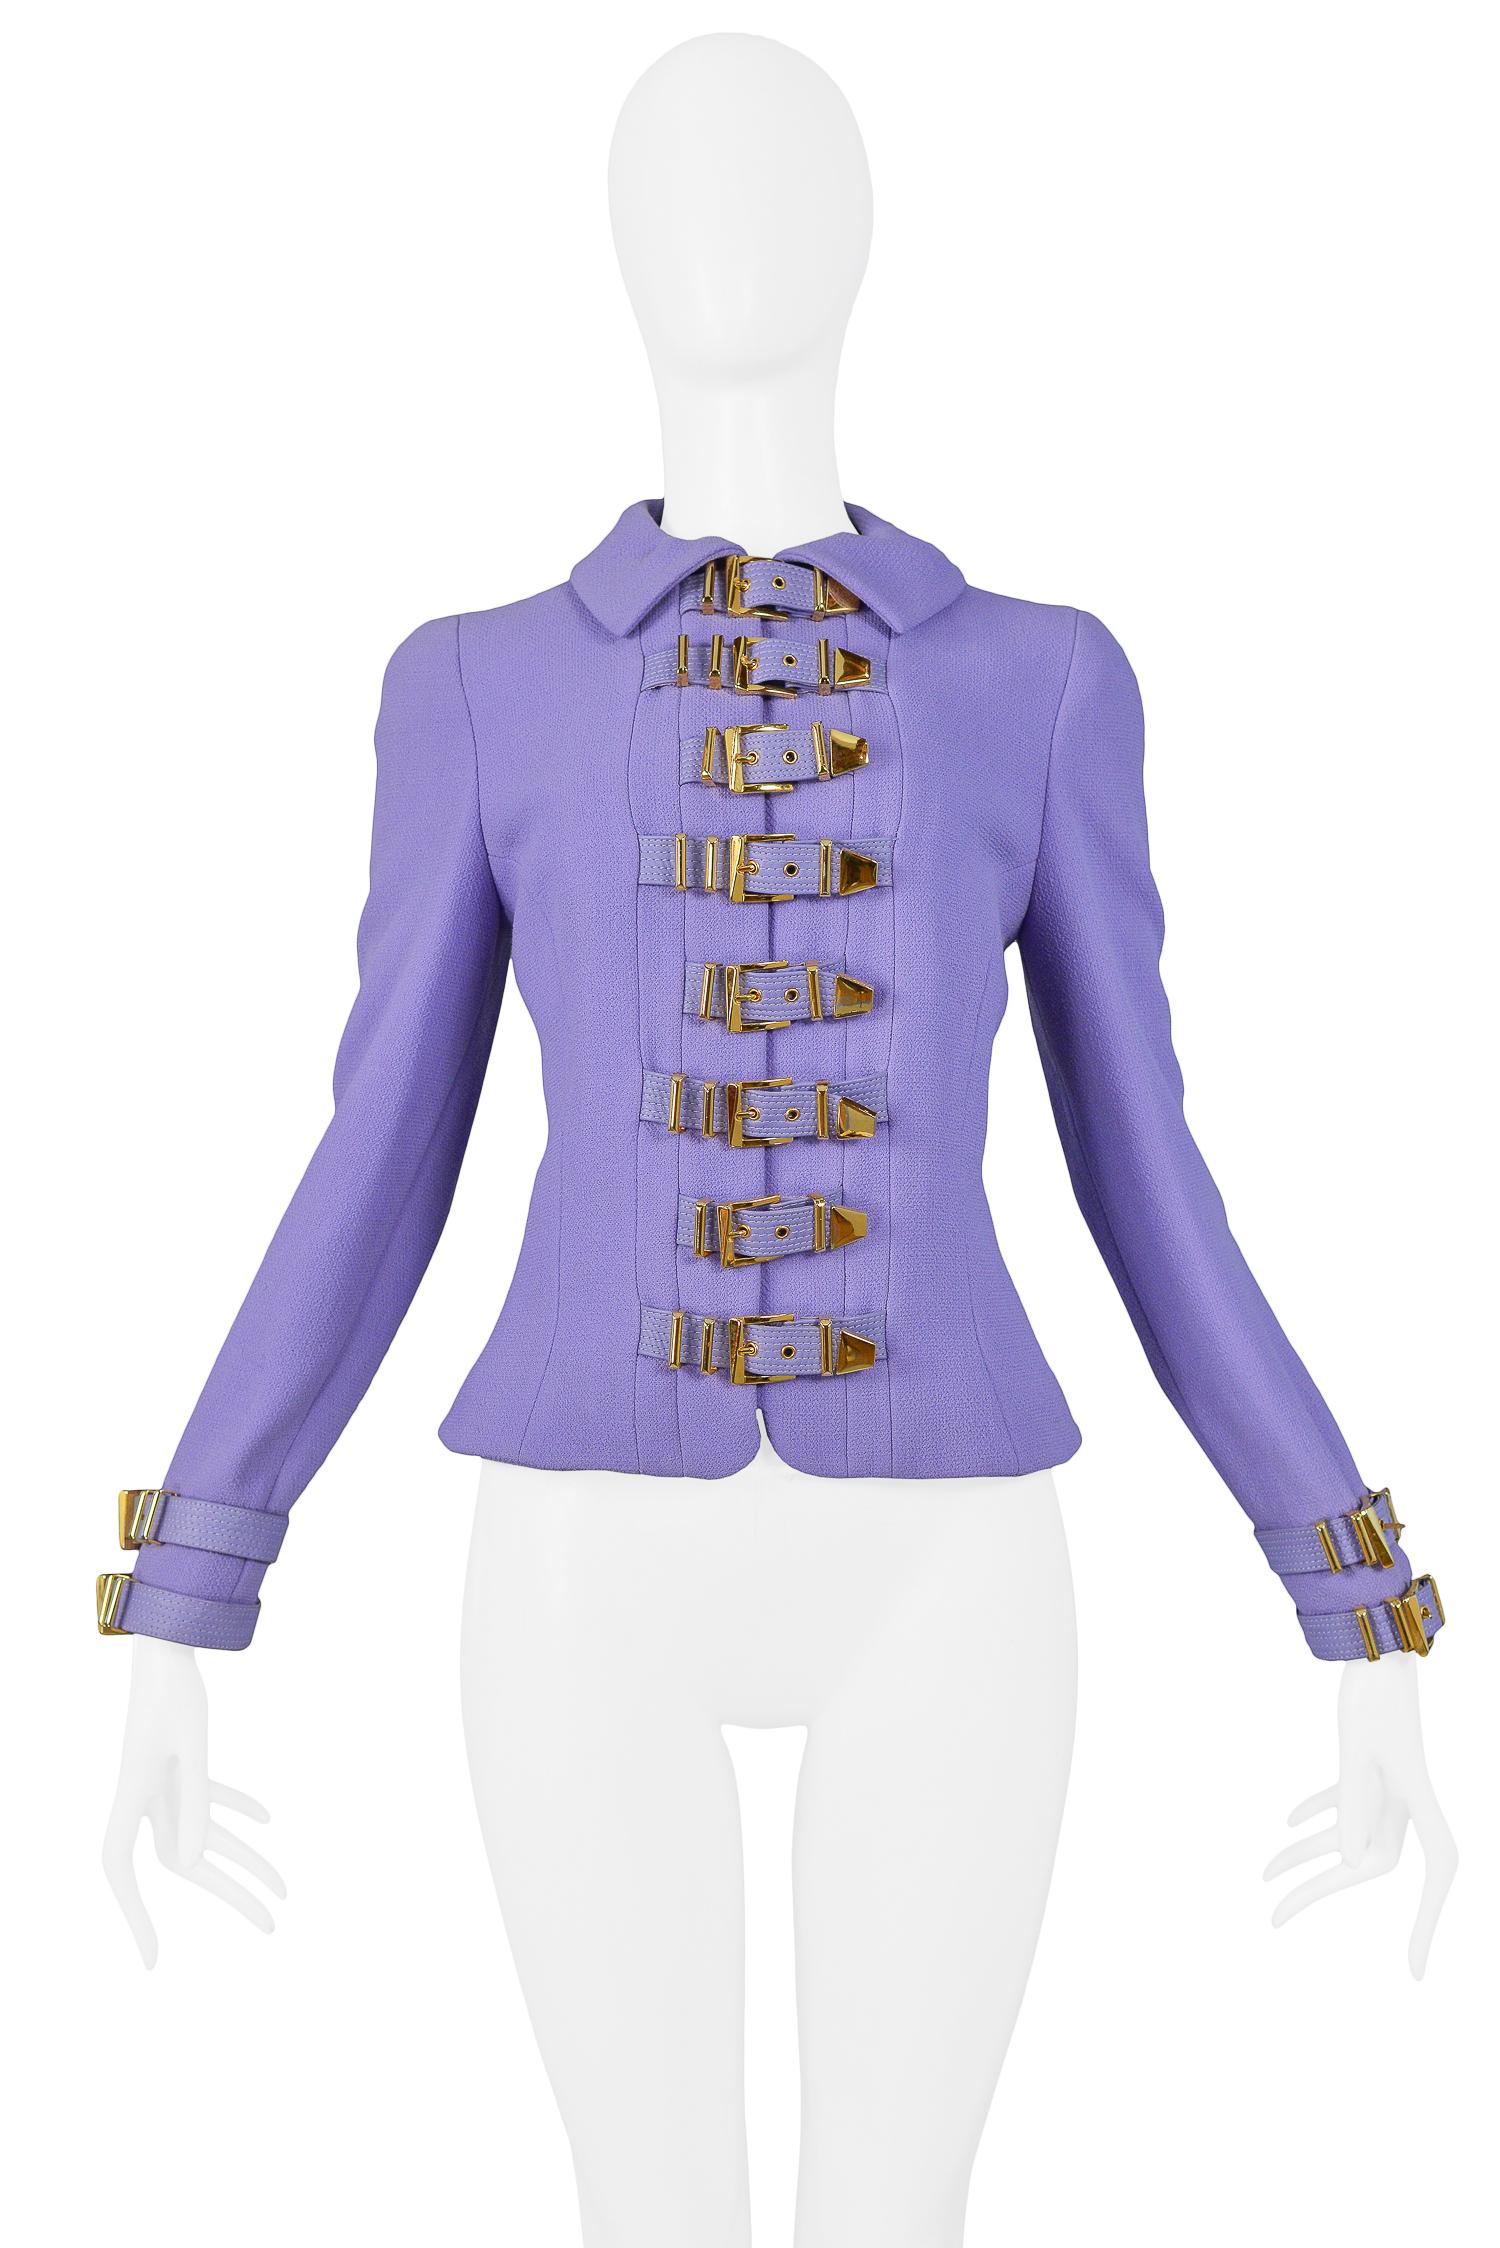 Iconic vintage Gianni Versace periwinkle purple bondage jacket with fold over collar and gold-tone bondage buckles at sleeve cuffs, center front closure, and center back. From the 1992 collection.

Excellent Vintage Condition.

Size 38